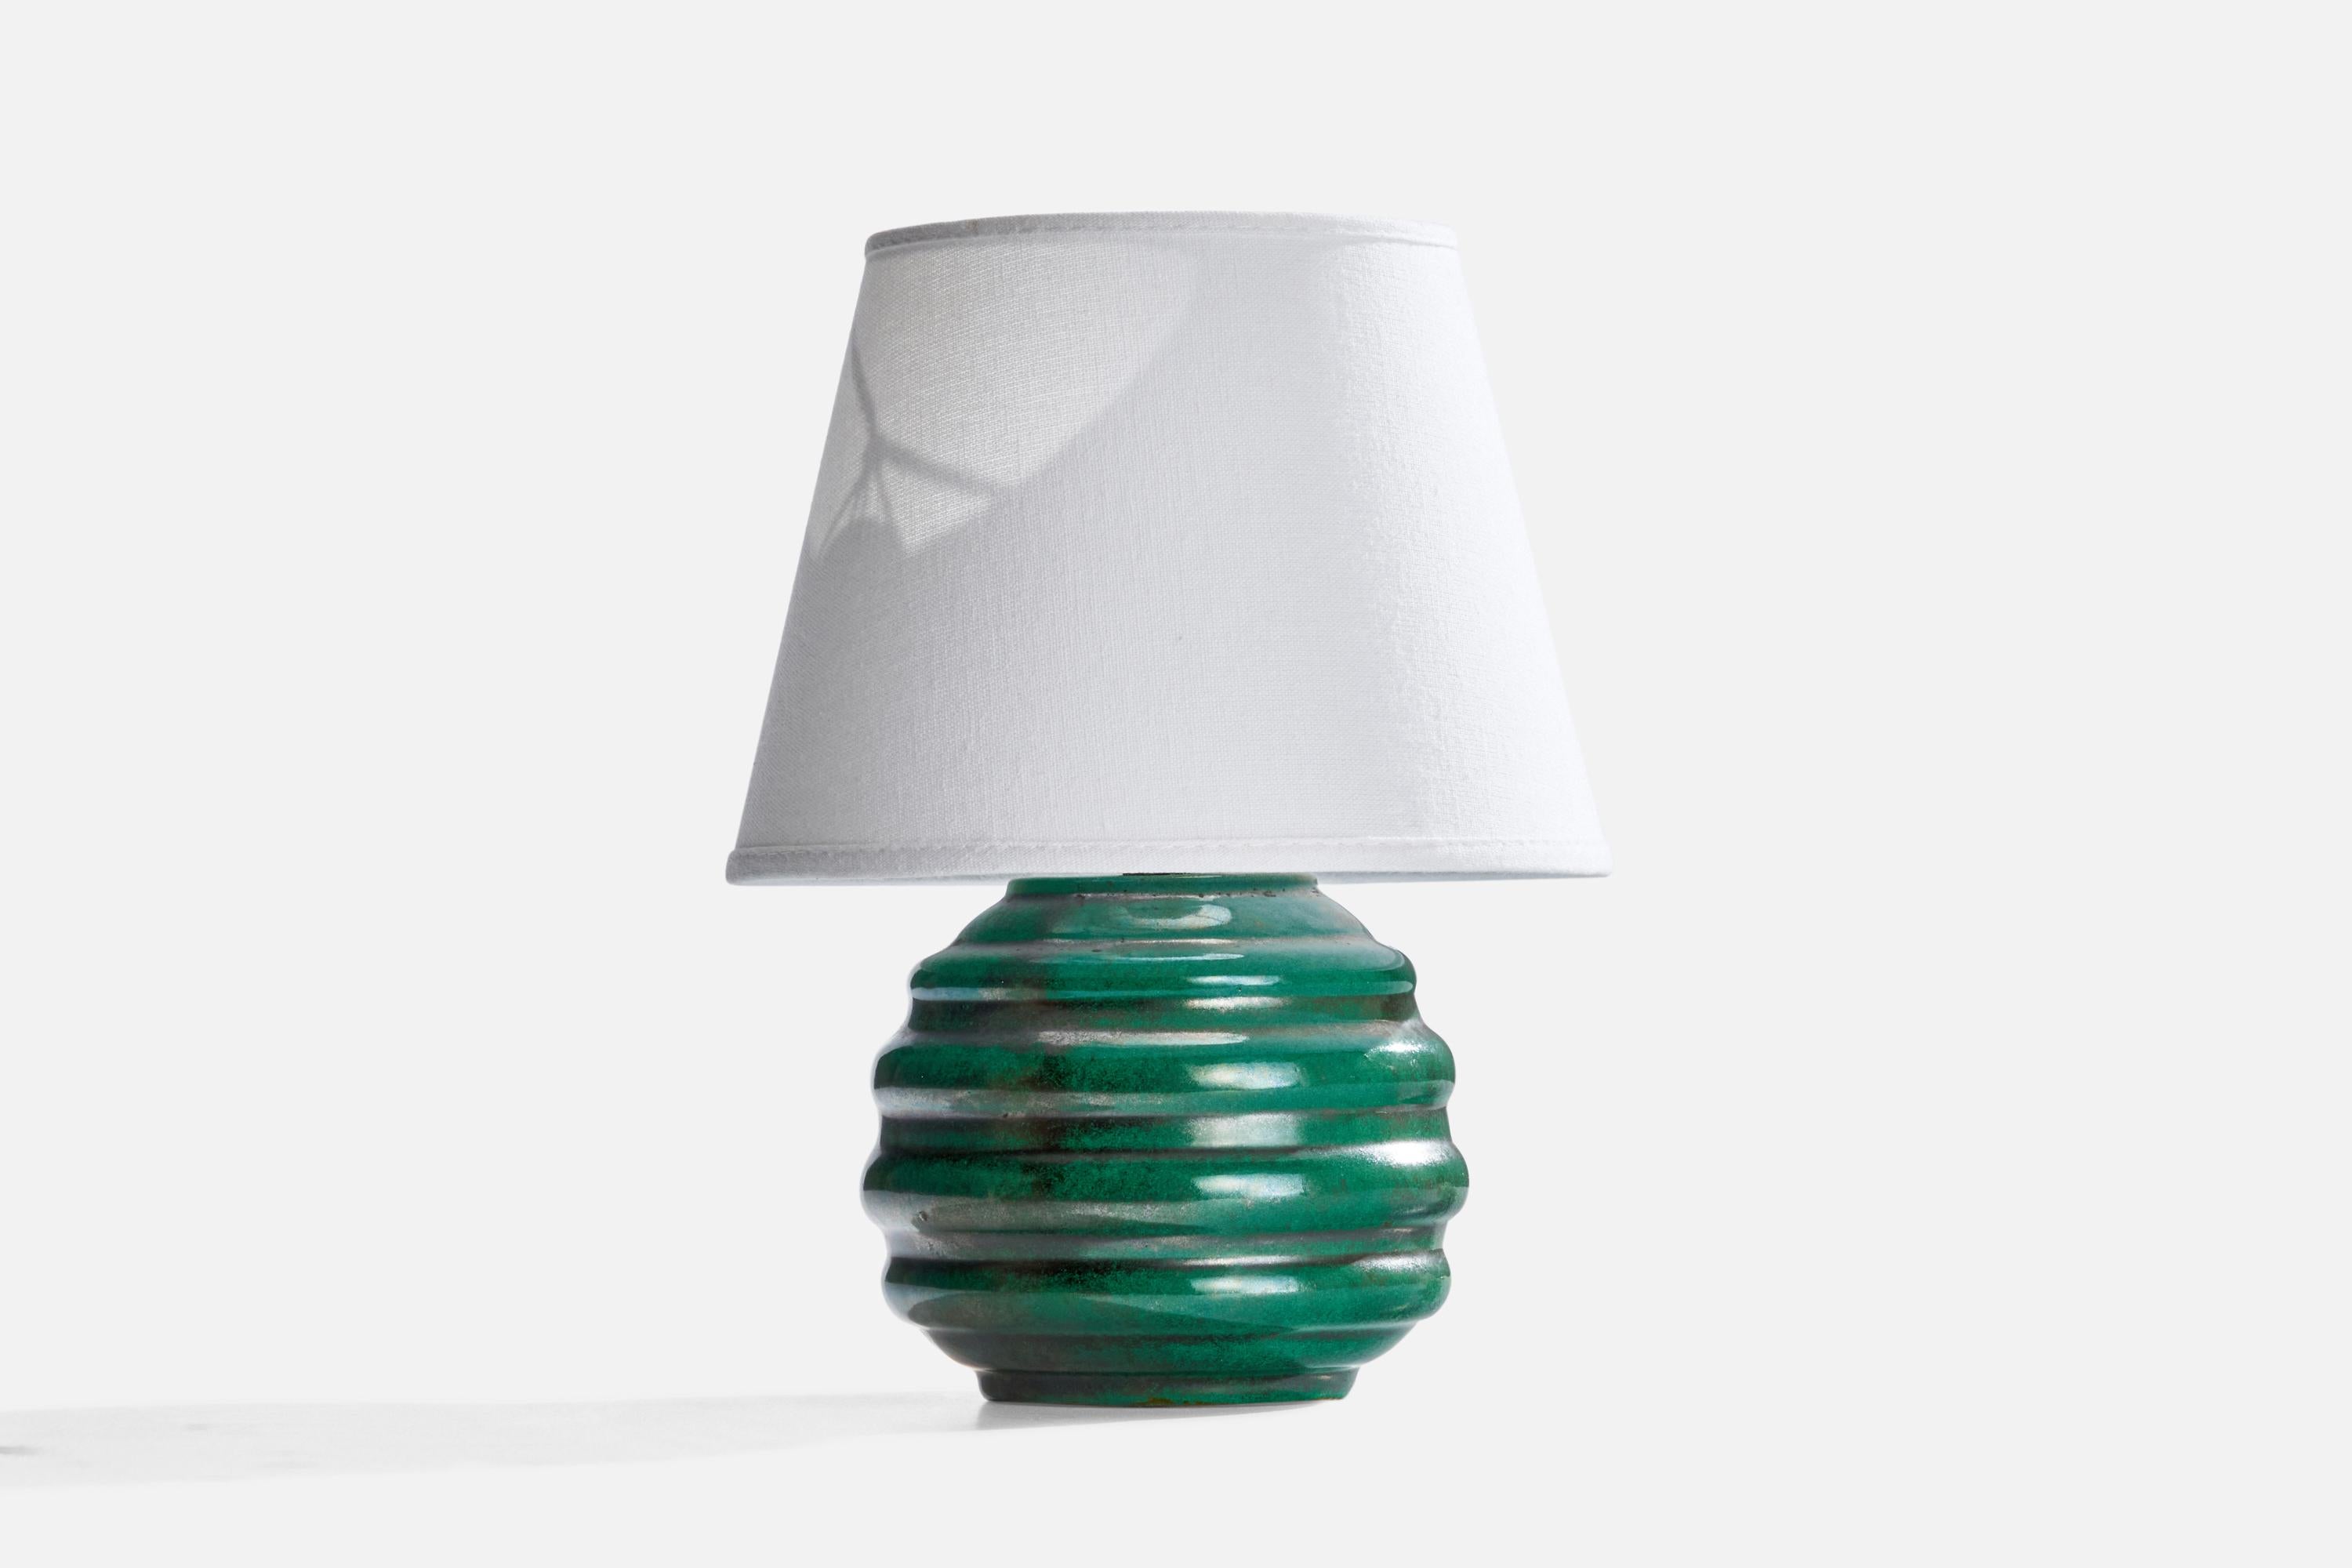 A green-glazed ceramic table lamp designed and produced in Sweden, c. 1930s.

Dimensions of Lamp (inches): 7” H x 5.25” Diameter
Dimensions of Shade (inches): 5”  Top Diameter x 8” Bottom Diameter x 6” H
Dimensions of Lamp with Shade (inches): 11” H